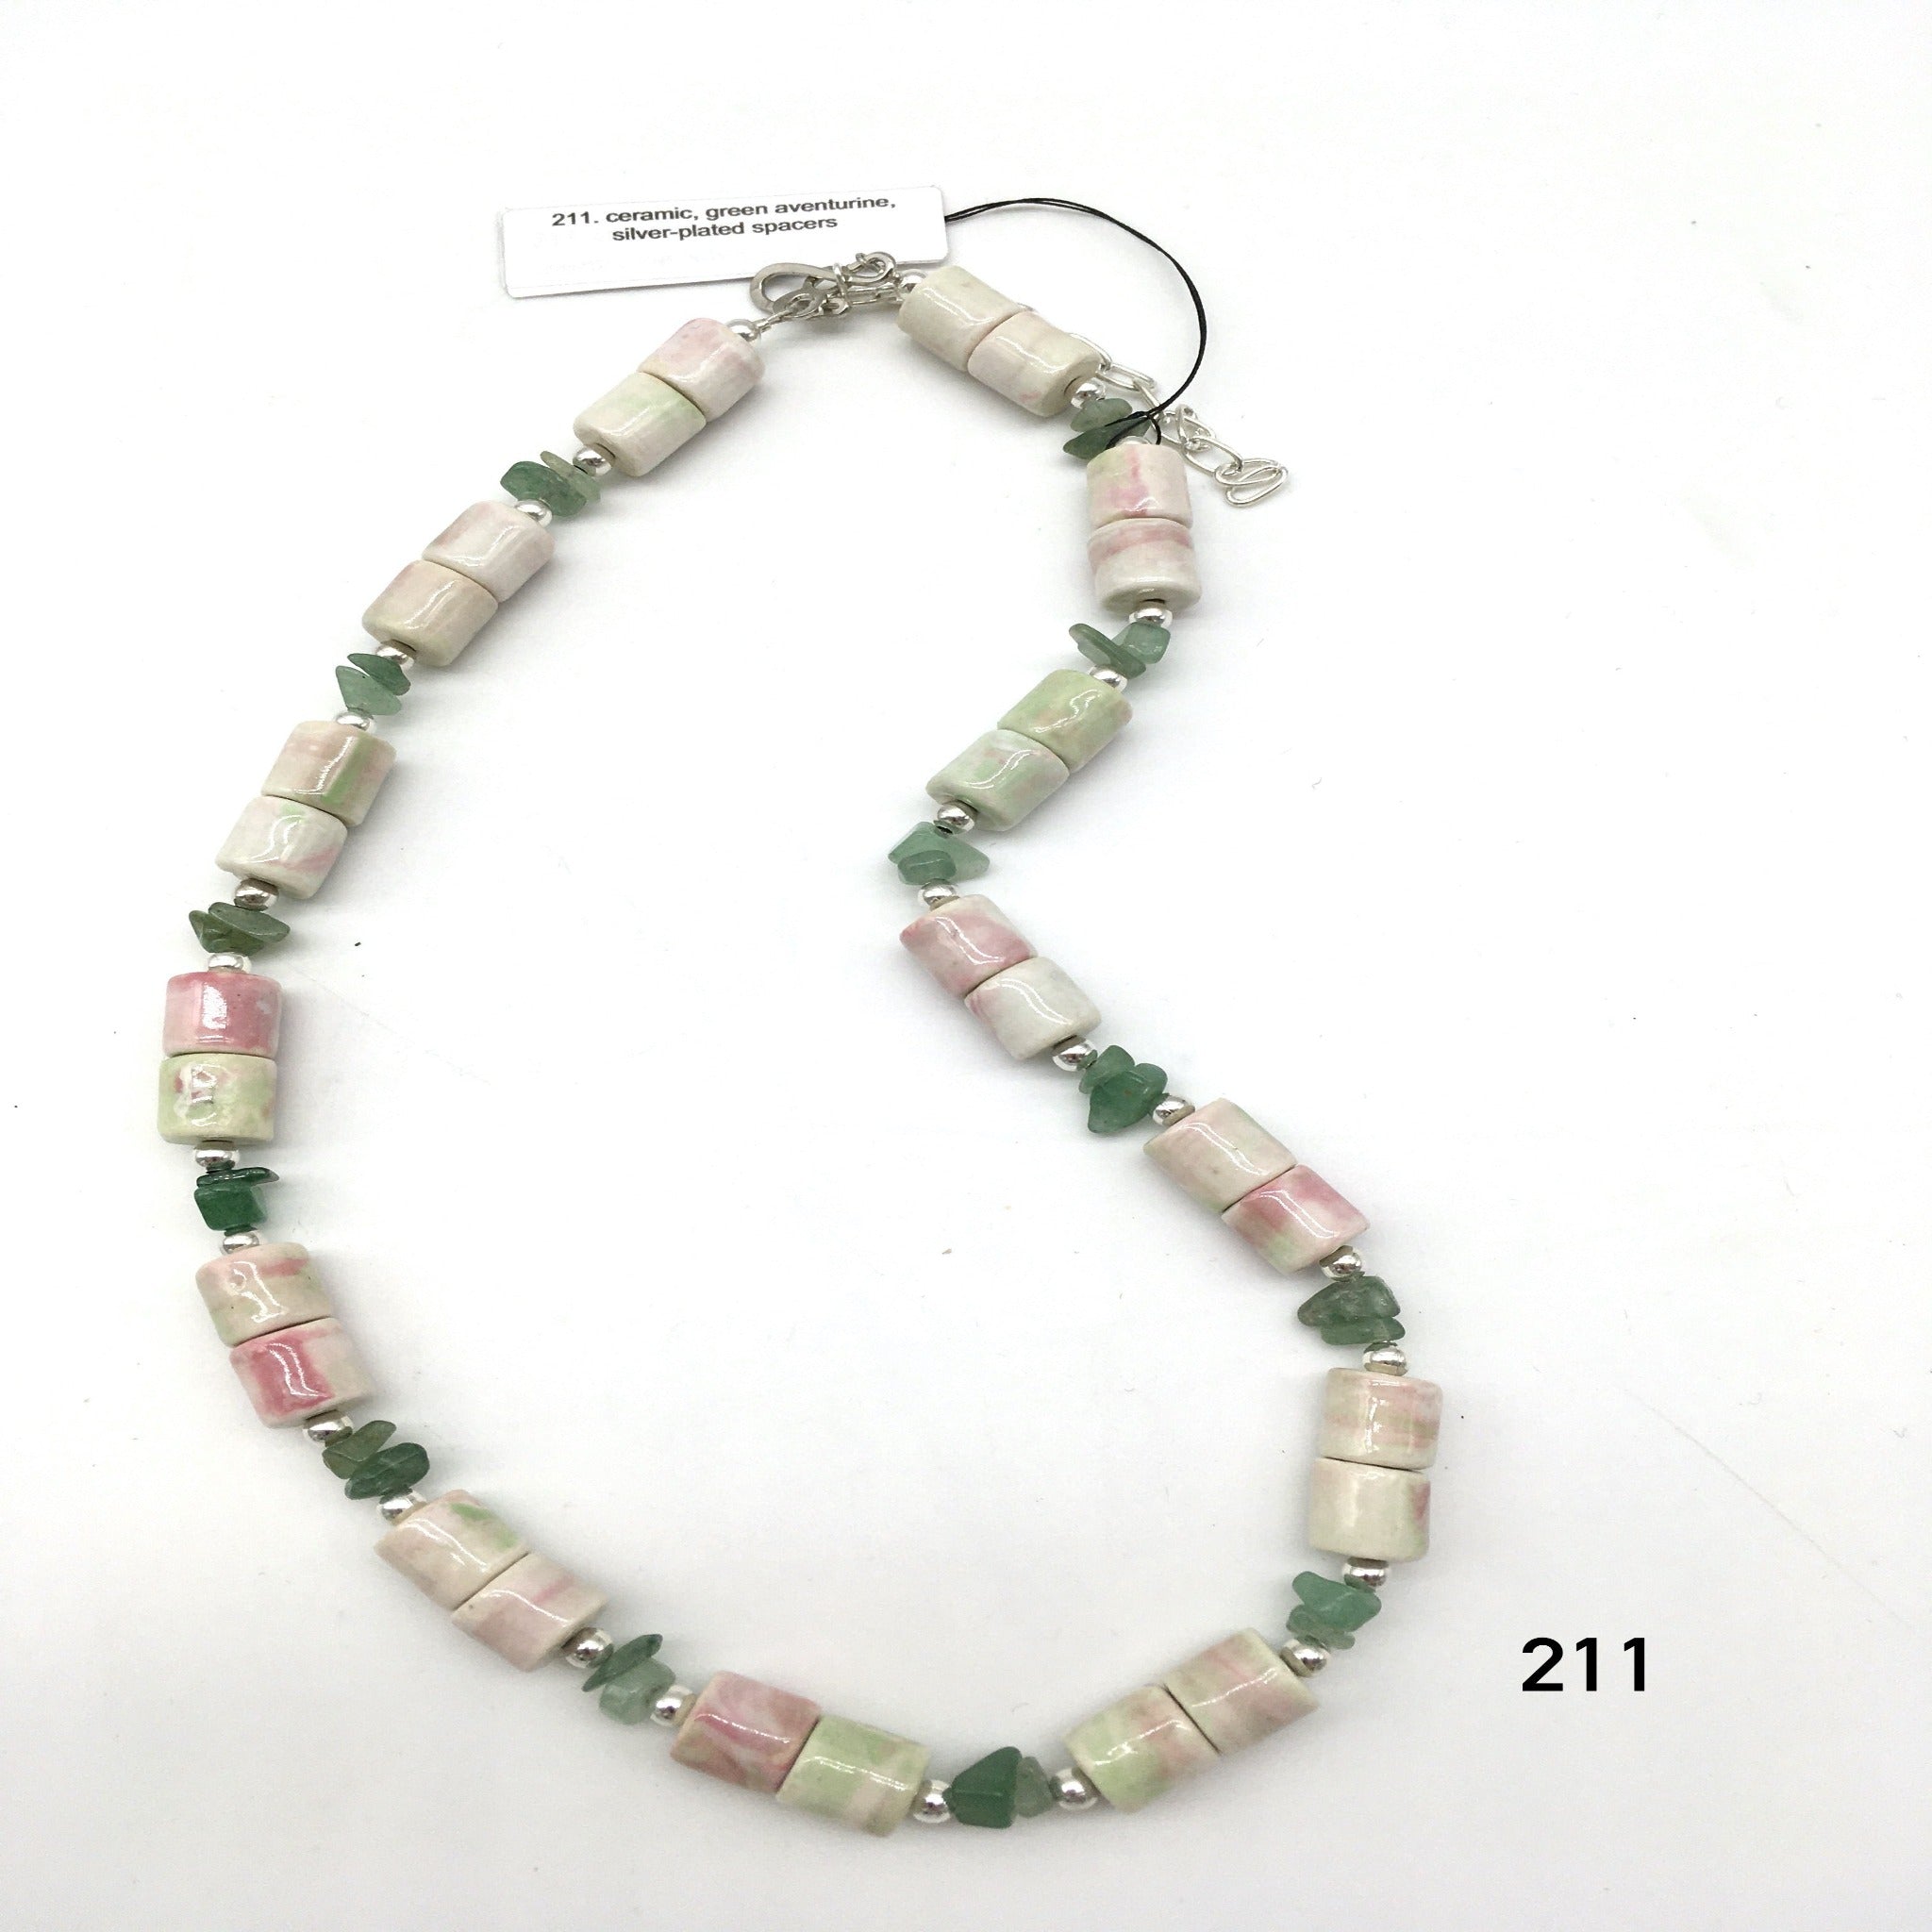 Ceramic, green aventurine, silver-plated spacers created by Dorothea Drew Design from central NJ